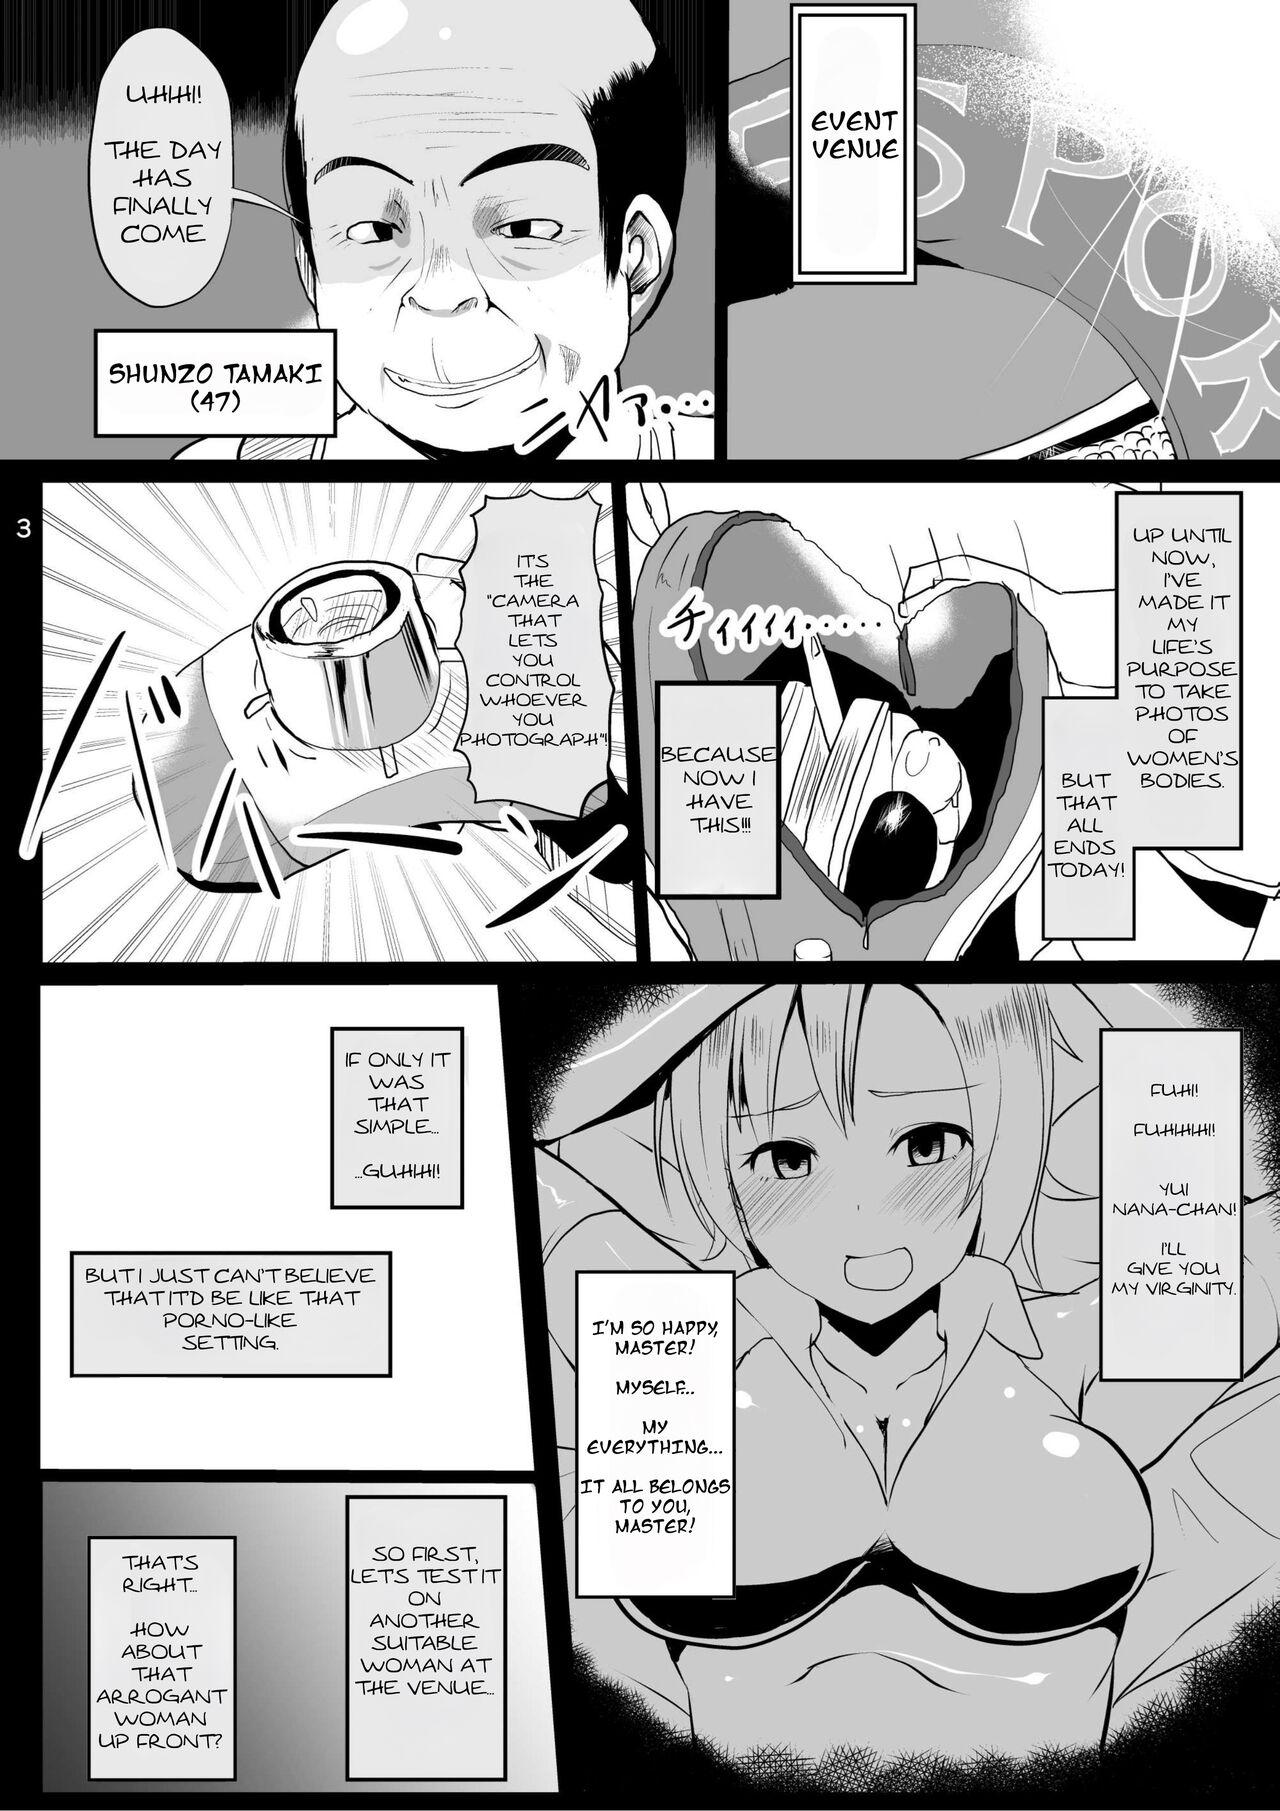 Black Hair Onna no Kokoro o Ossanka Suru Camera | Changing a Woman's Heart to an Old Man's With a Camera - Original For - Page 4